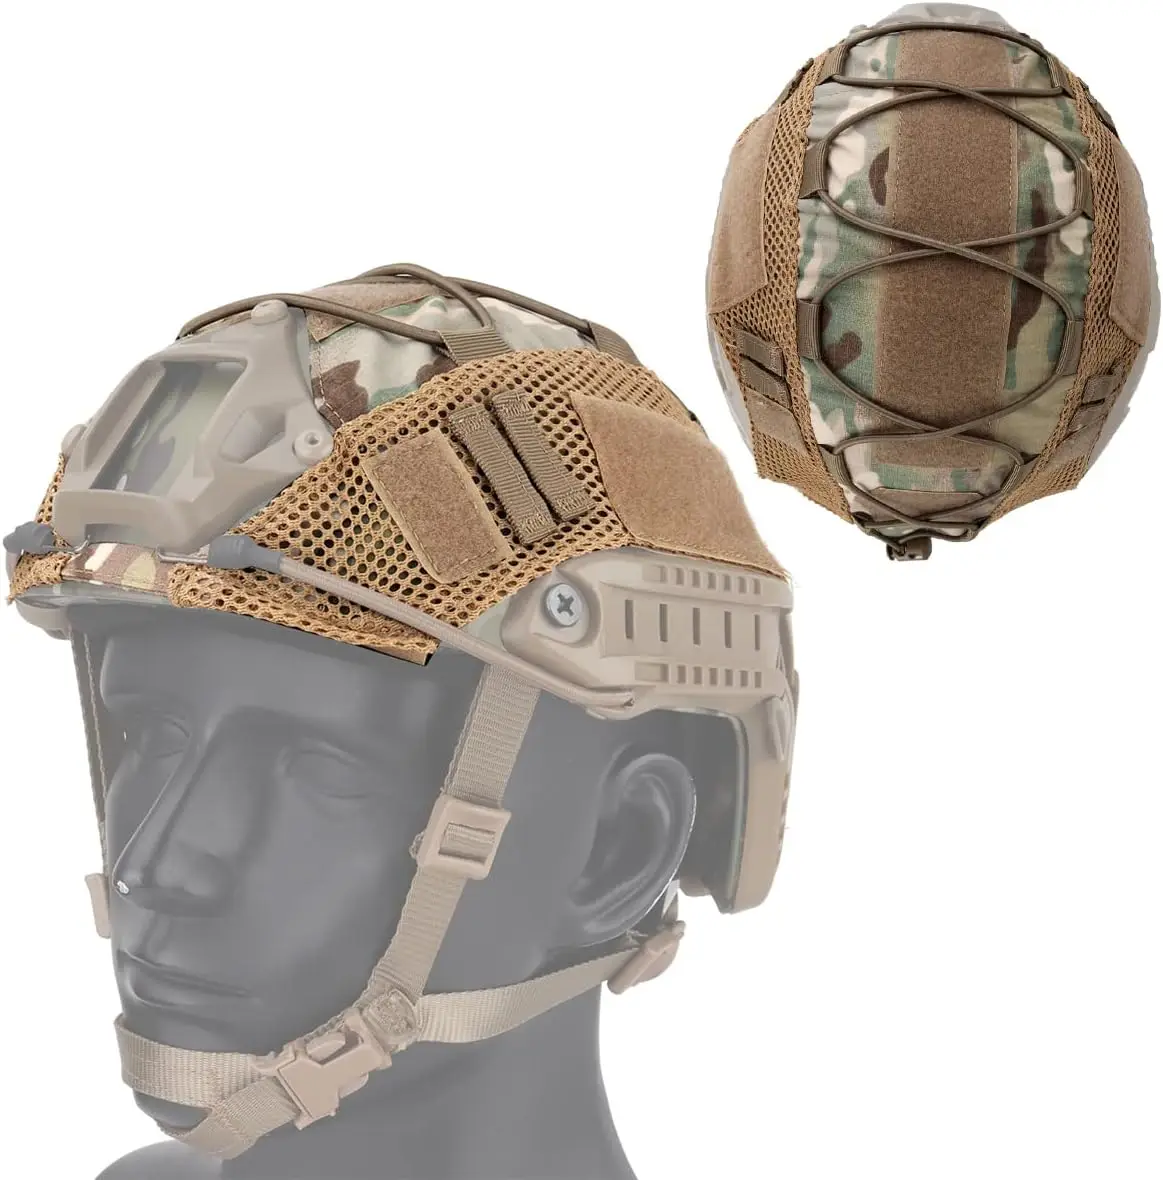 

Fast MH PJ BJ Helmet Tactical Camouflage Helmet Cover Airsoft Paintball Helmet Headdress Cover Accessories with Elastic Straps